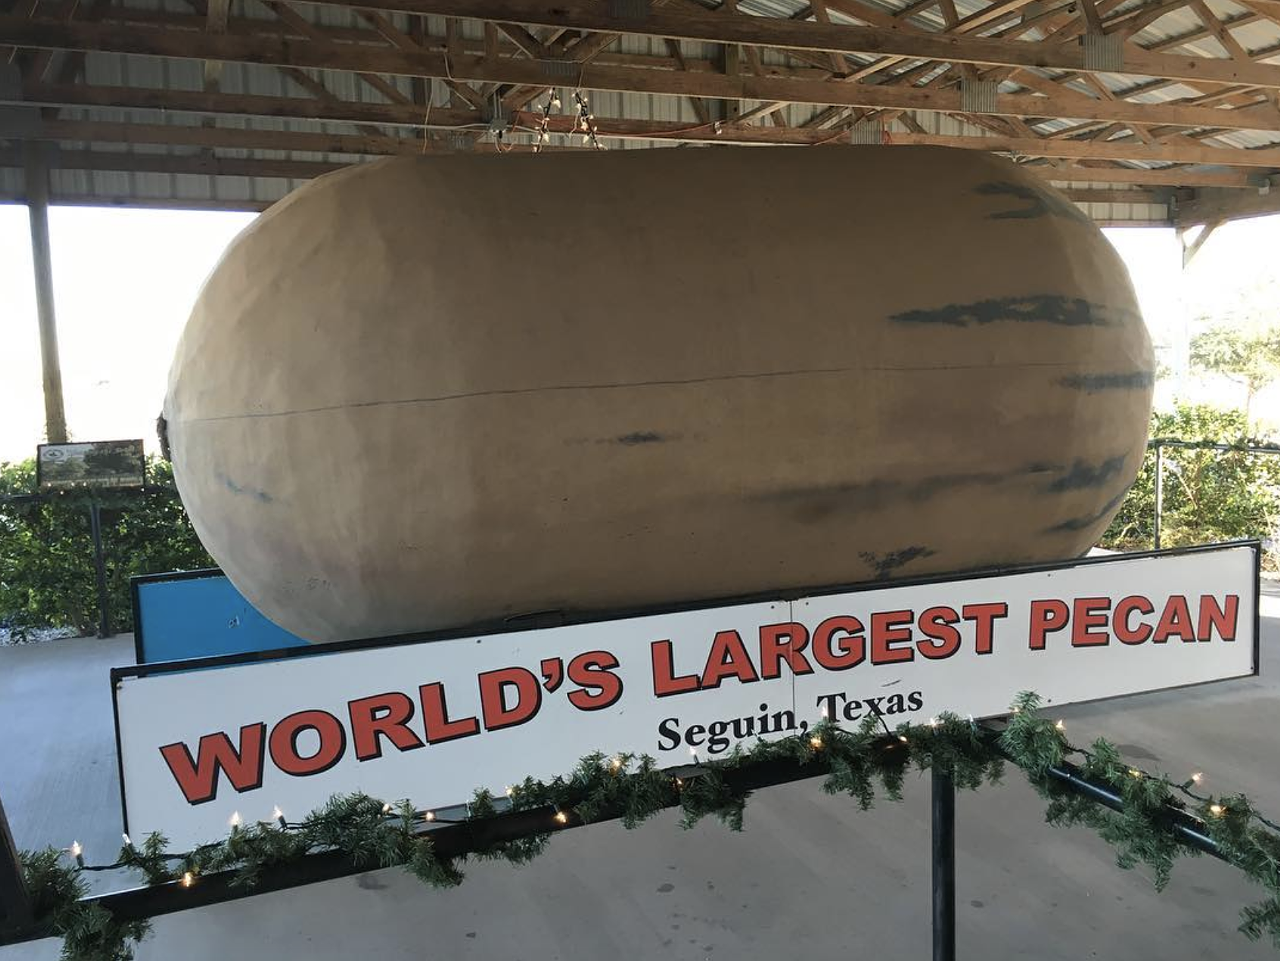 World's Largest Pecan, Seguin, TX
390 Cordova Road, Seguin, roadsideamerica.com
The Pecan Capital of the world won the title not just for its fields of ofTexan pecan trees but also for the 16-foot long, 8-foot wide statue of a pecan which sits outside of the Pecan Museum of Texas, which houses Texan folk art and nutcrackers. 
Photo via Instagram /  angrygardener